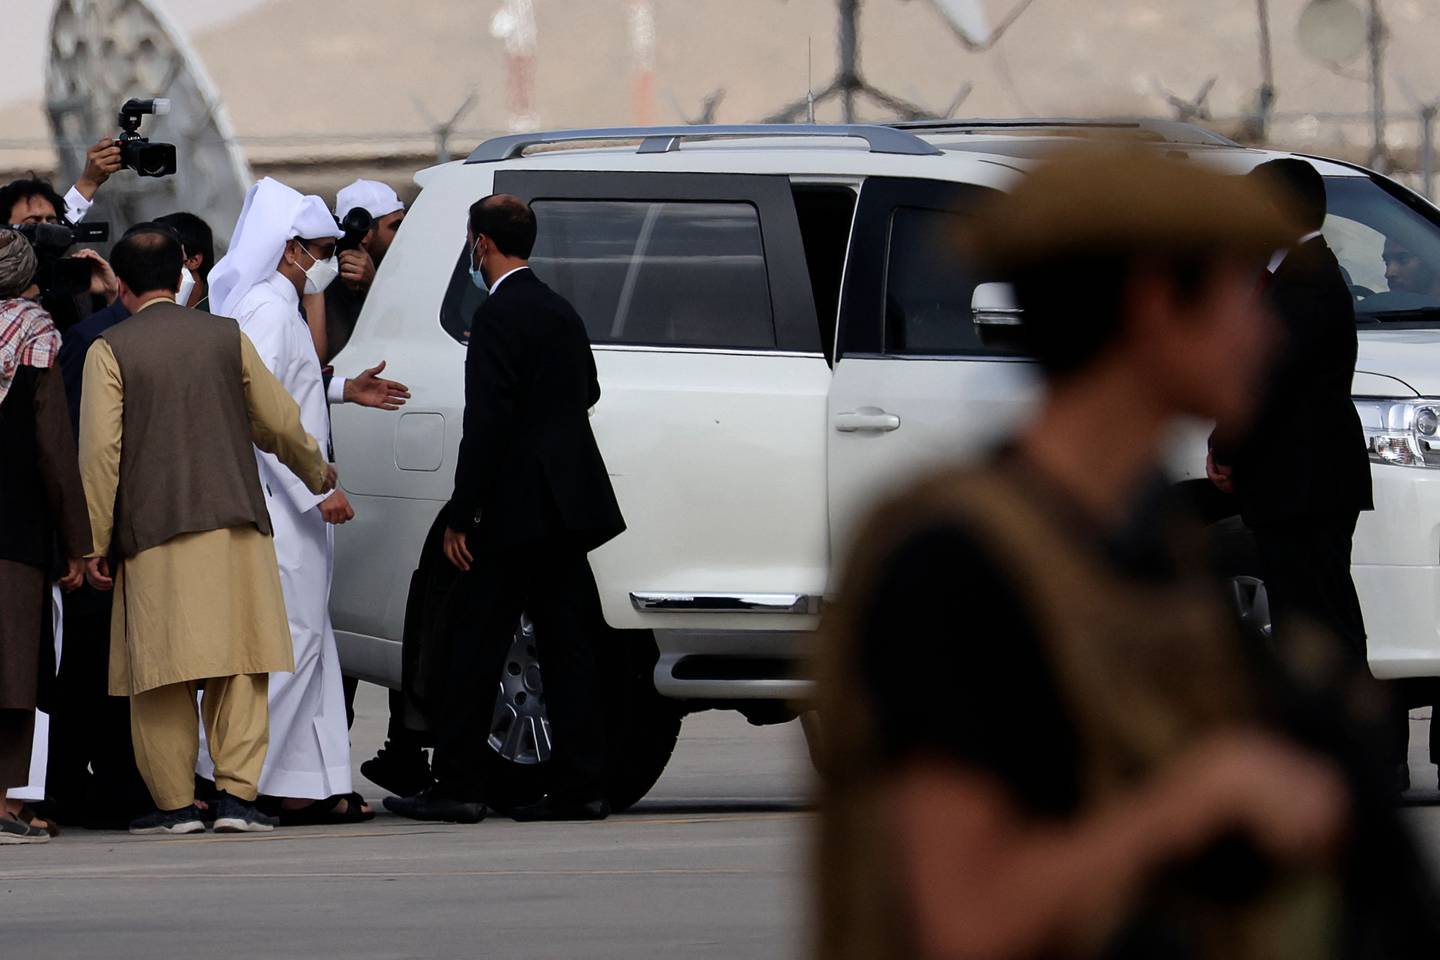 Qatari Foreign Minister Mohammed bin Abdulrahman Al Thani (centre) gets into a car after landing in Kabul. AFP